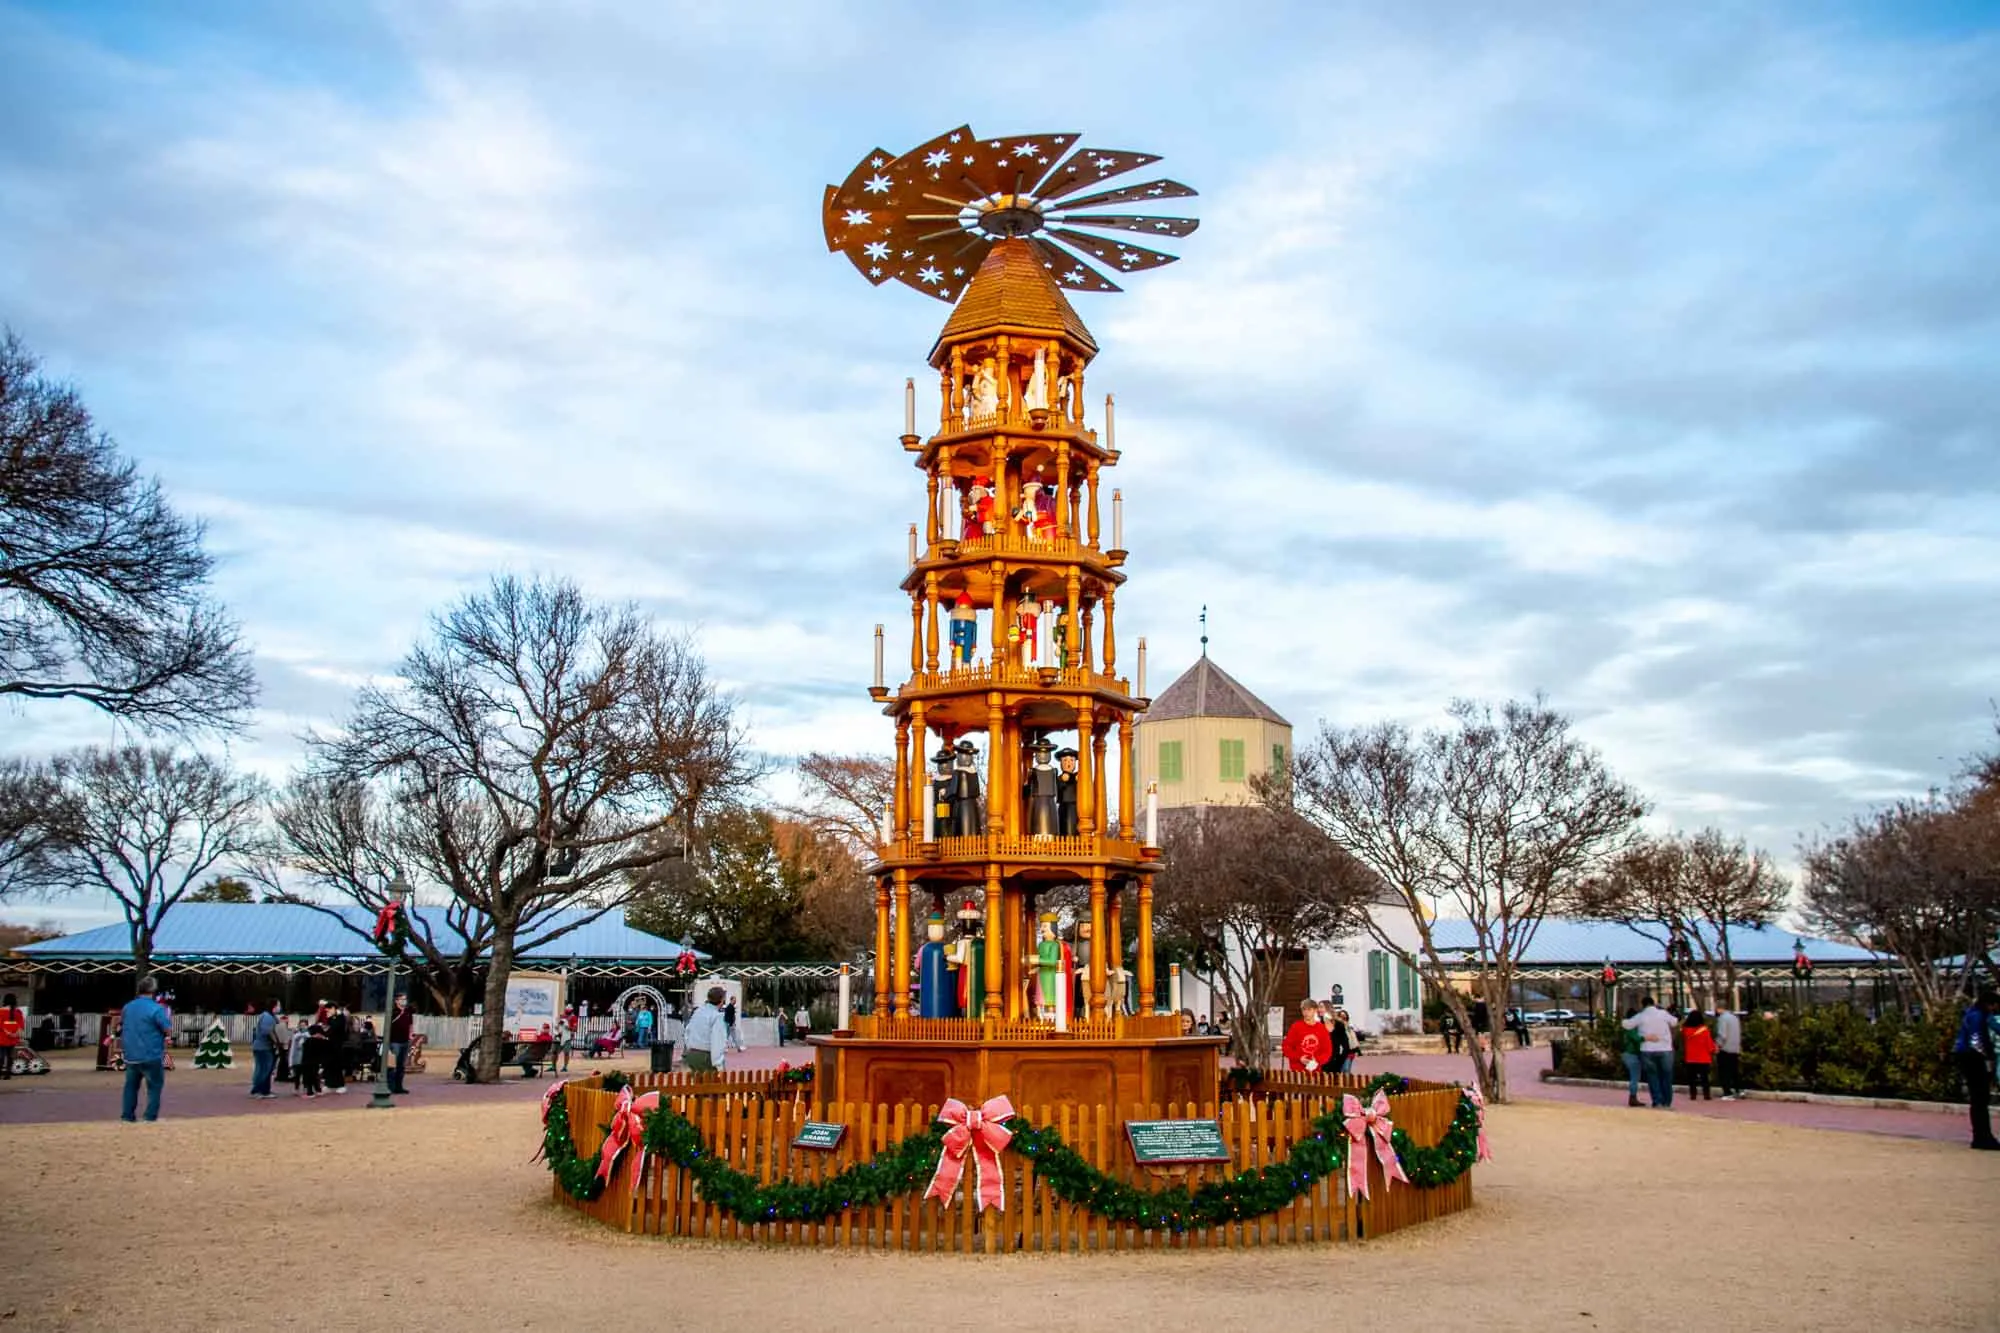 Large wooden tower topped with a propeller and decorated with holiday garland